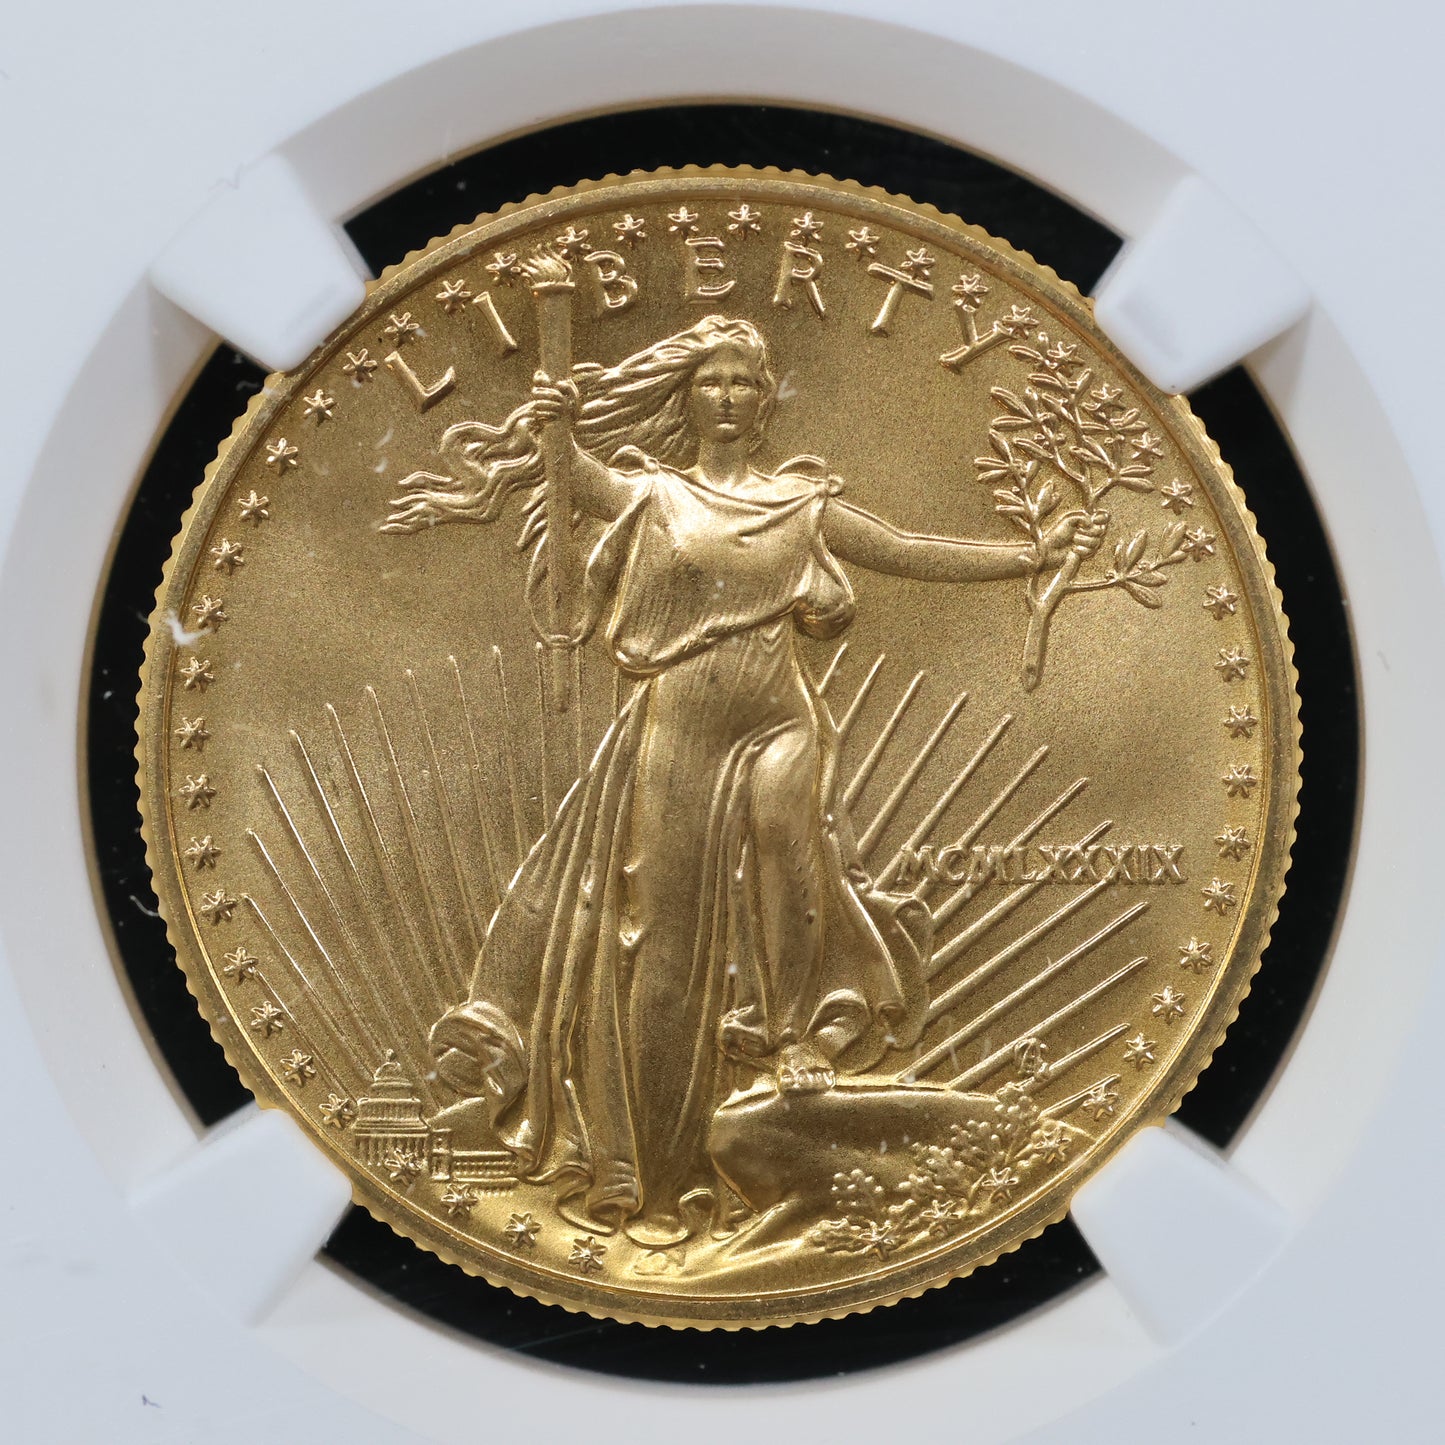 1989 1/2 oz Gold American Eagle 25$ Bullion Gold Coin - NGC MS 69